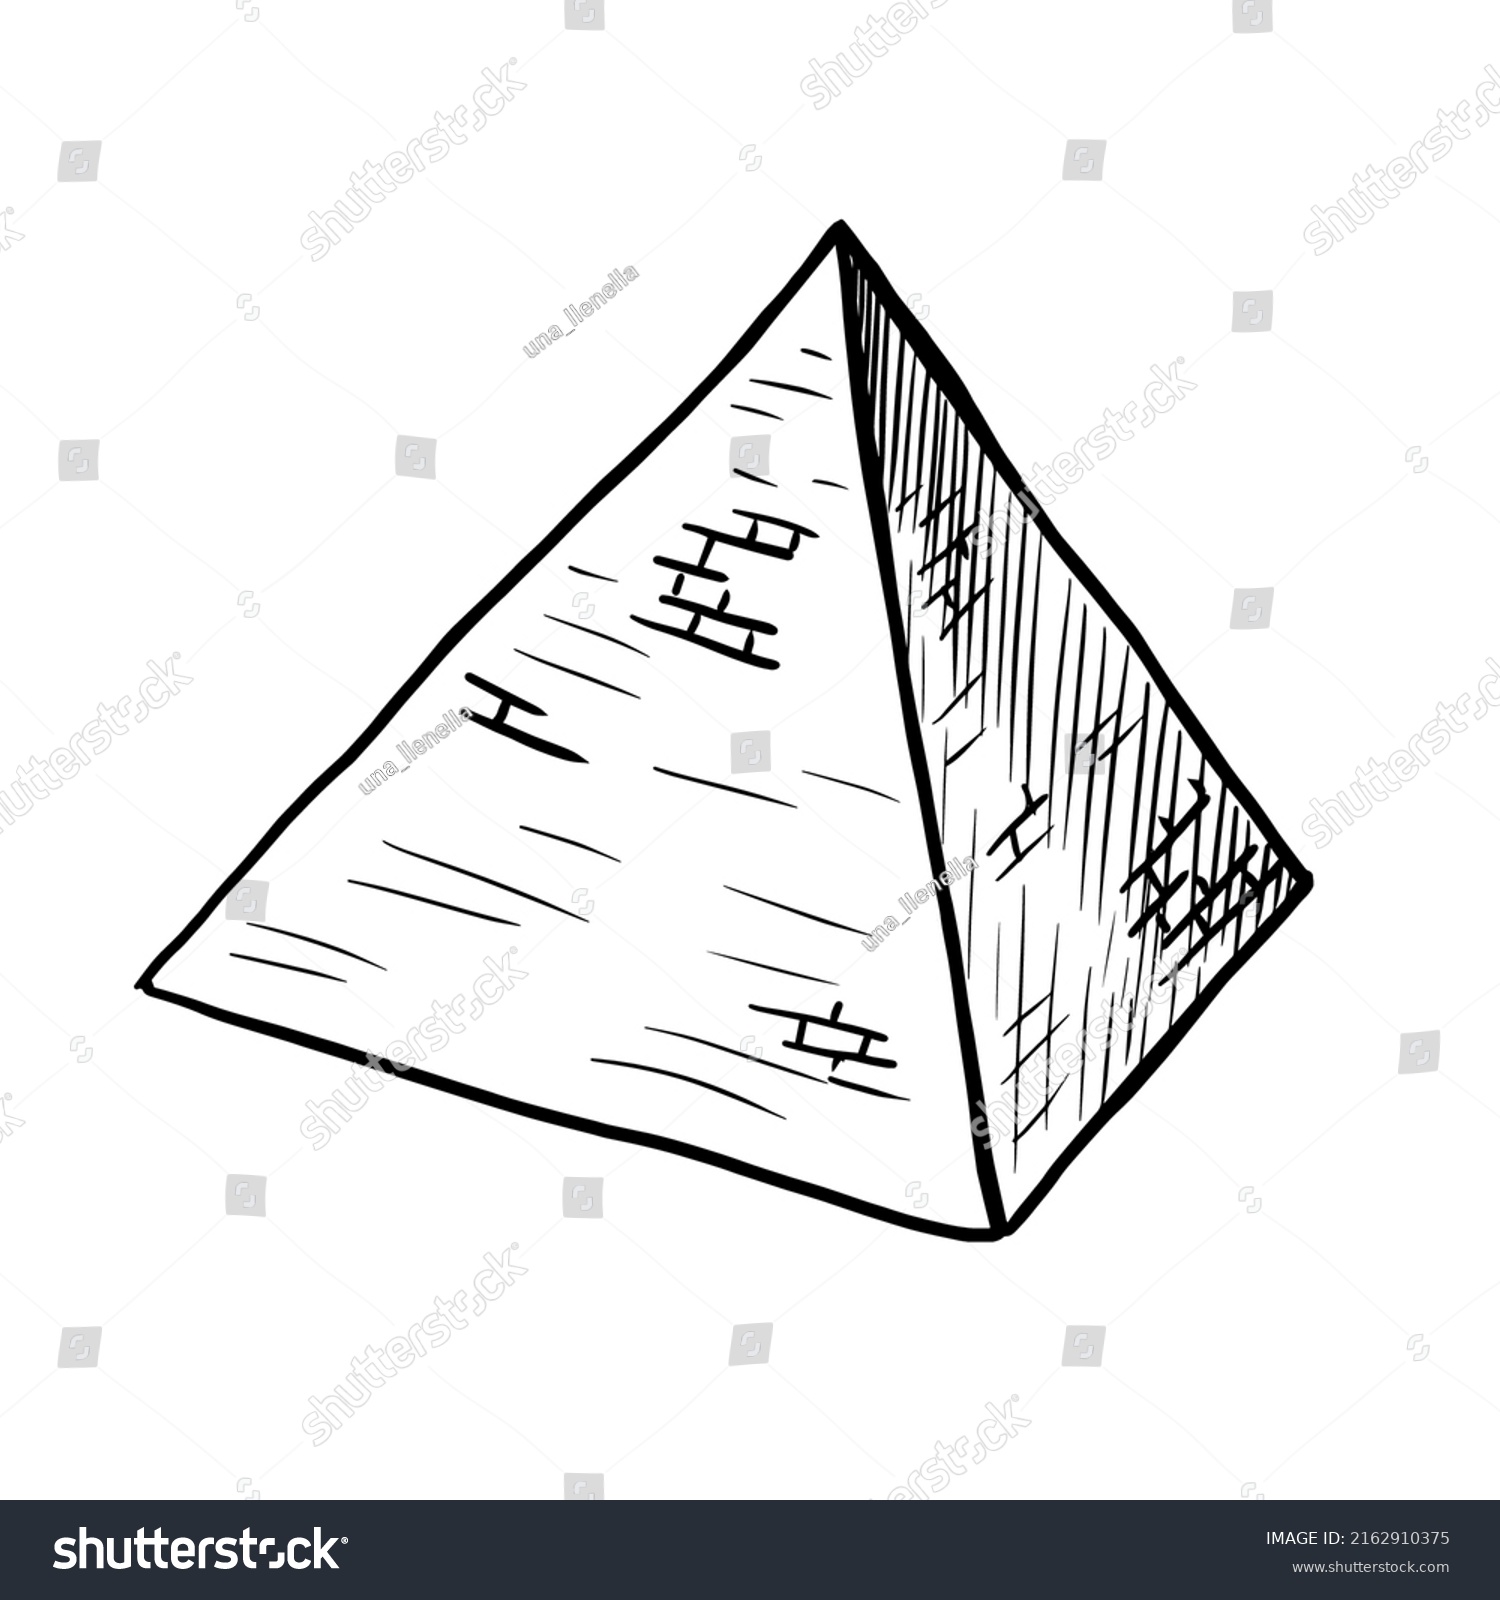 Pyramid Vector Illustration On White Background Stock Vector (Royalty ...